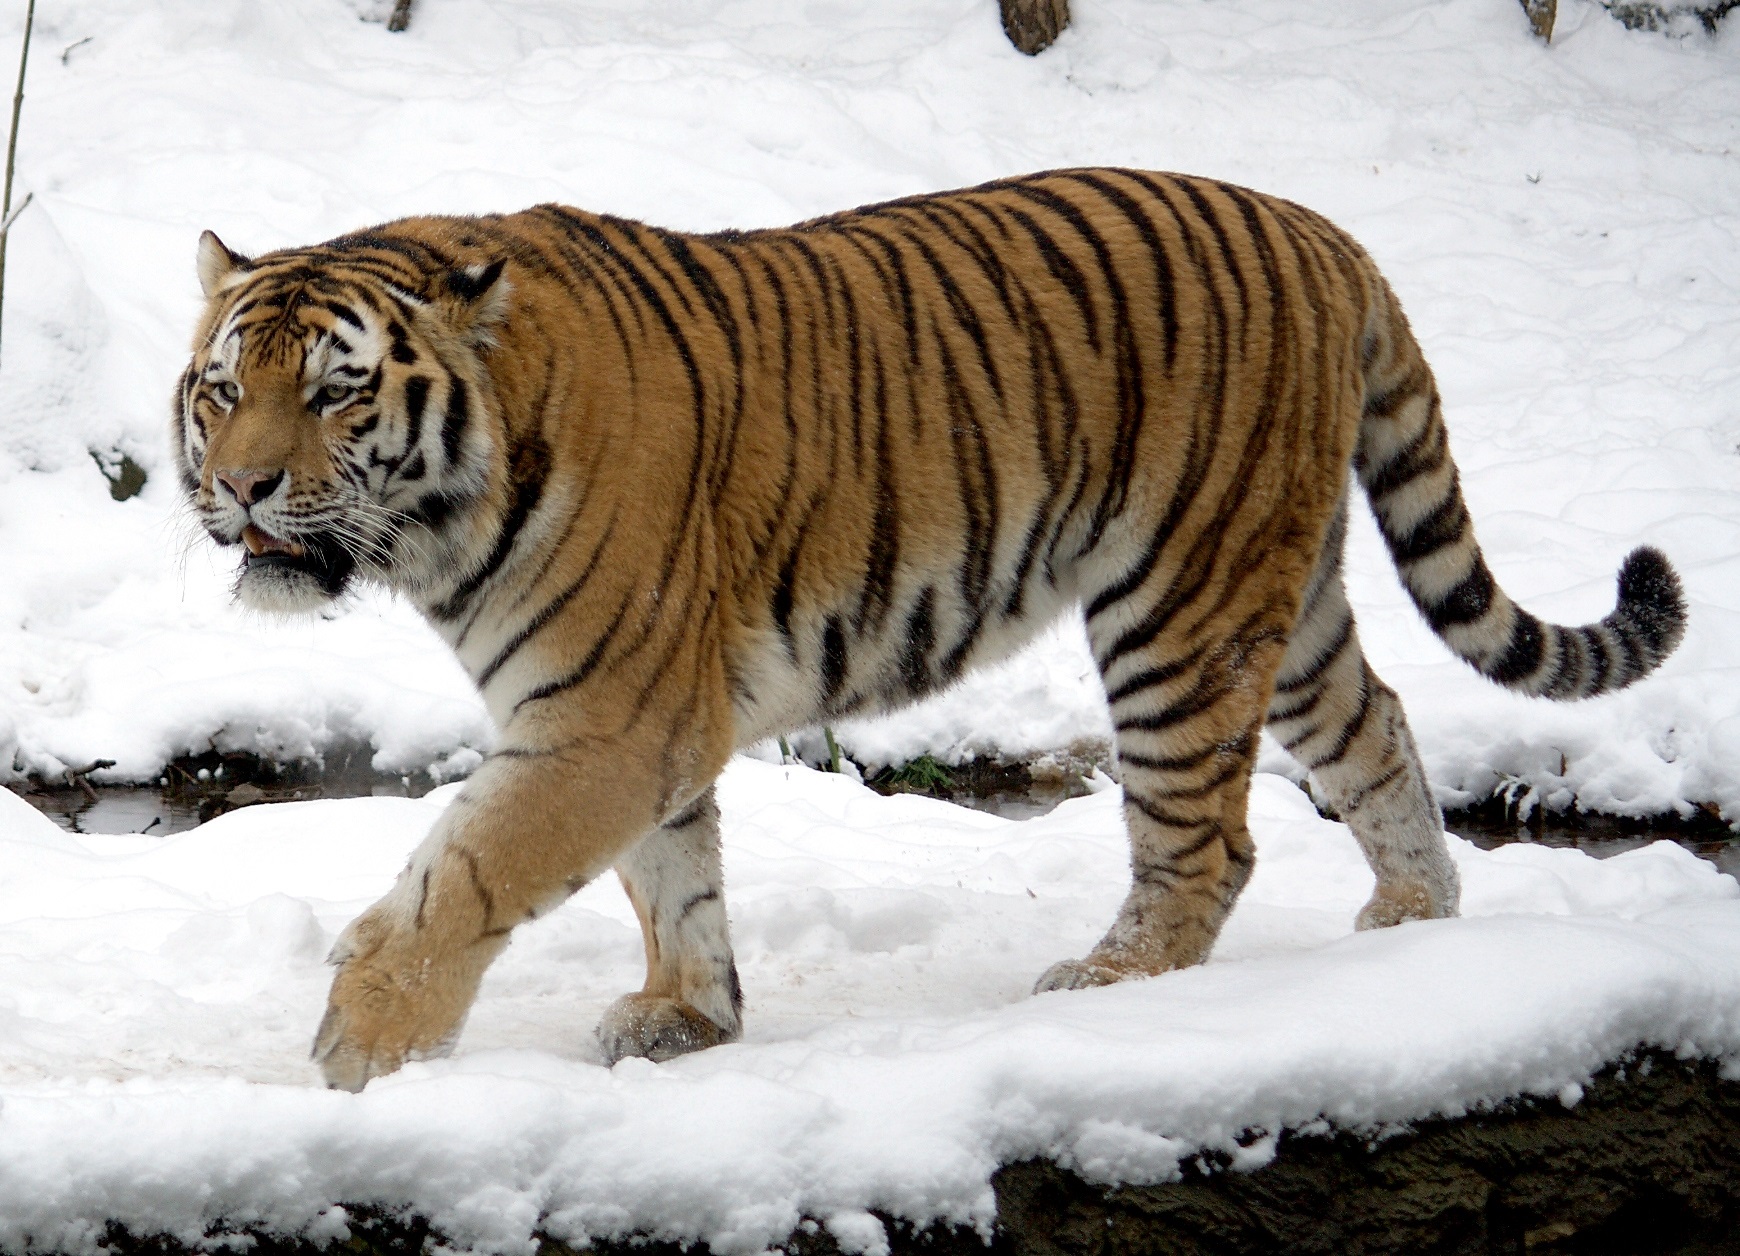 What is the scientific name of the Siberian tiger?